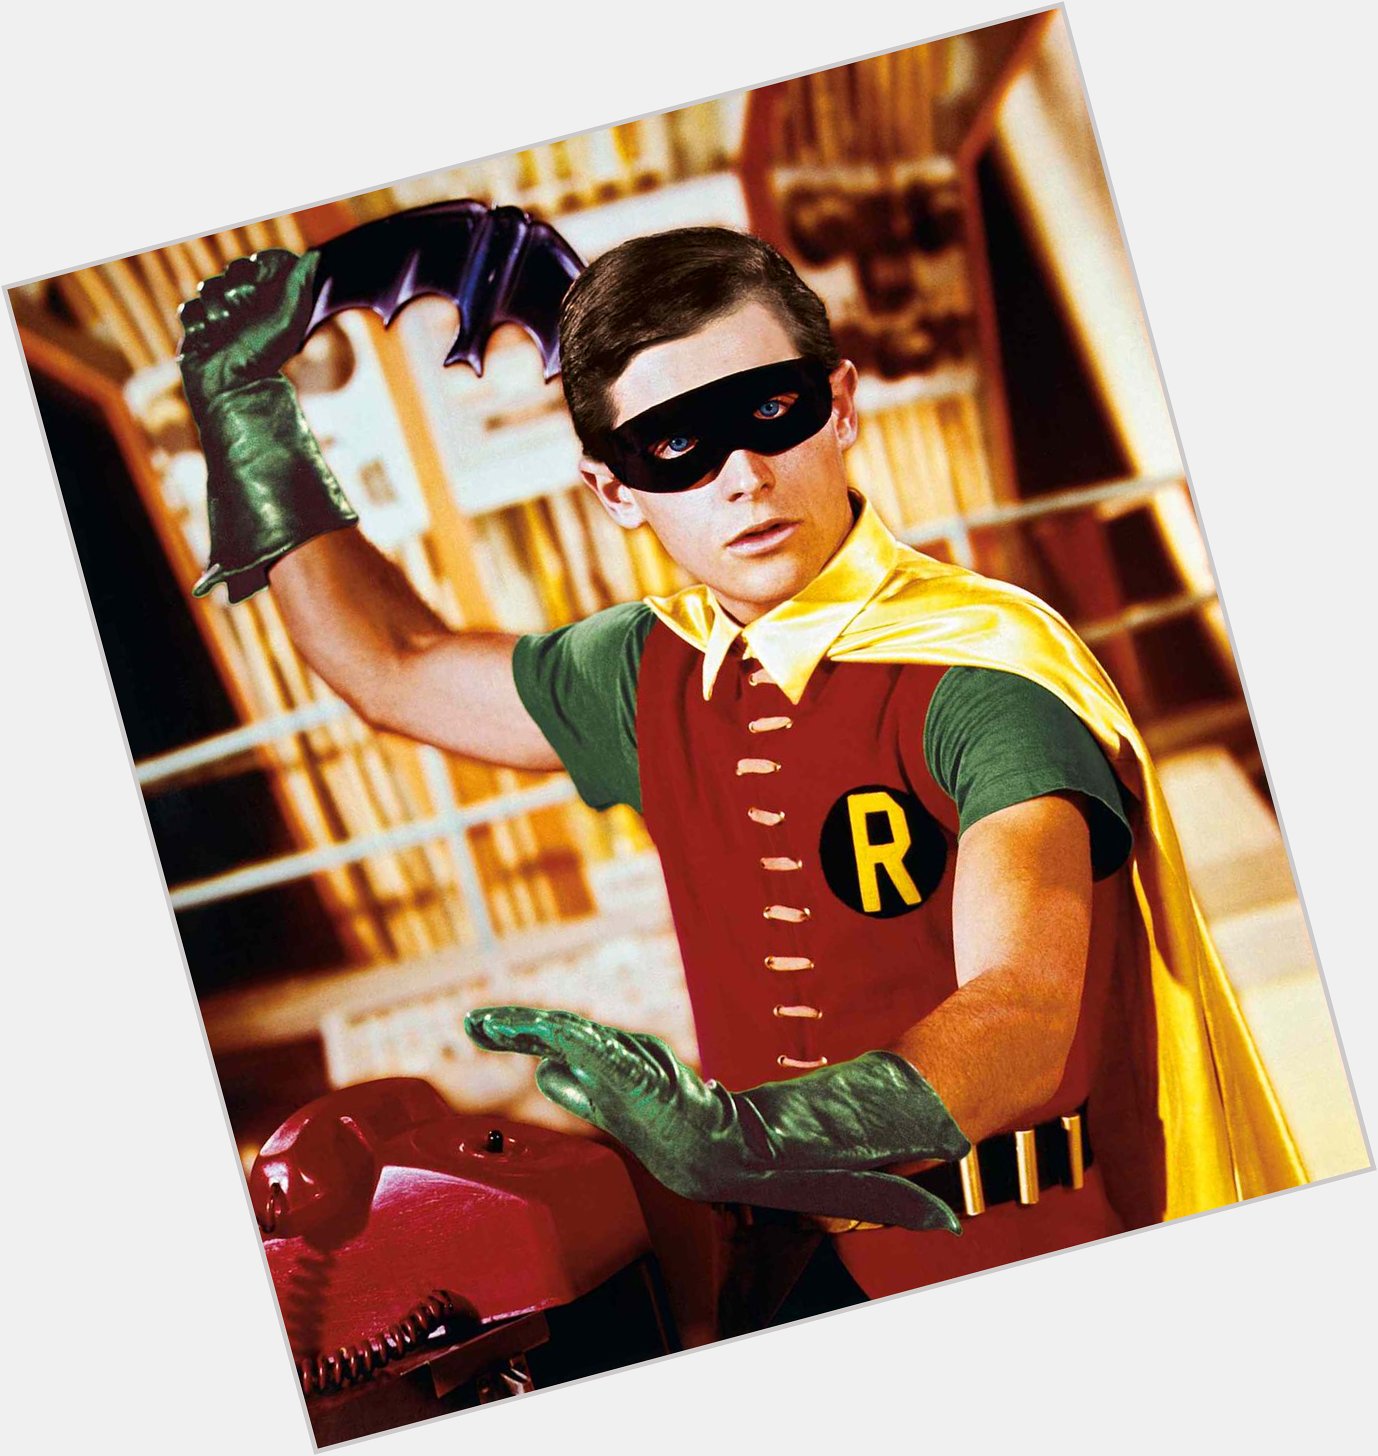 The 1st Robin I ever knew about is 78 years young today. Happy Birthday Burt Ward (aka Dick Grayson/Robin) 